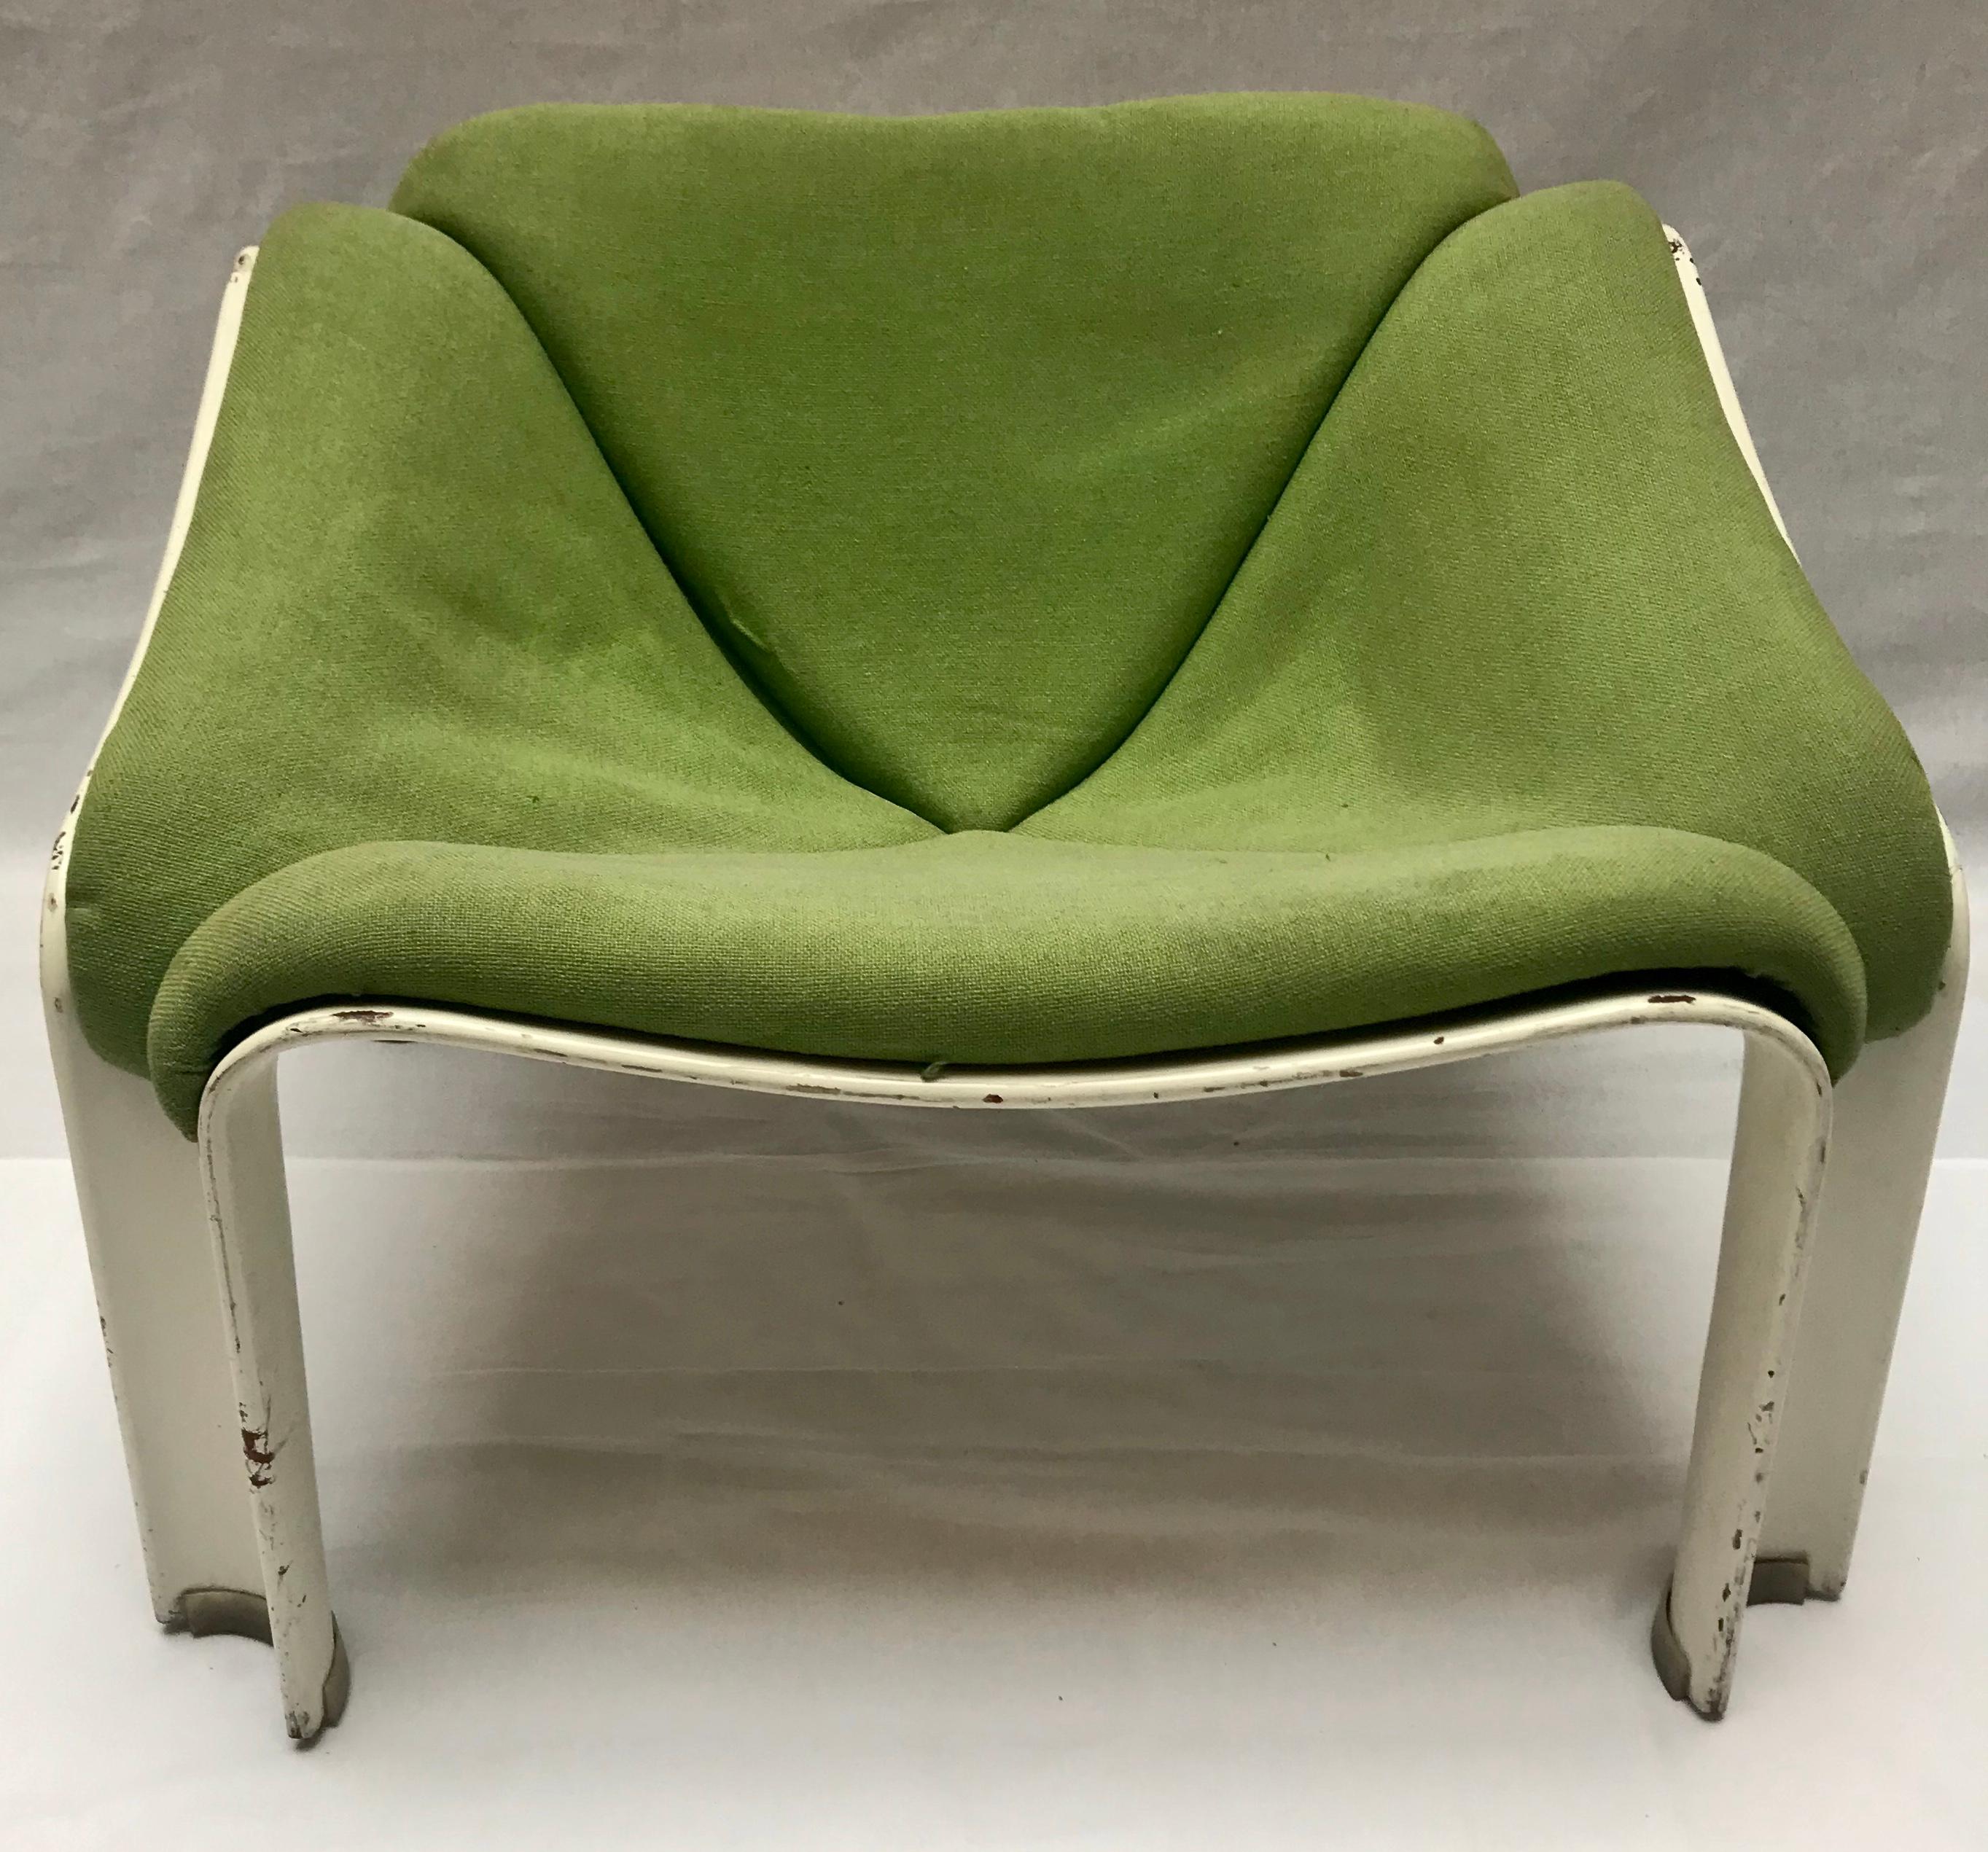 Early production F300 groovy lounge chair by French designer Pierre Paulin for Artifort, 1967.